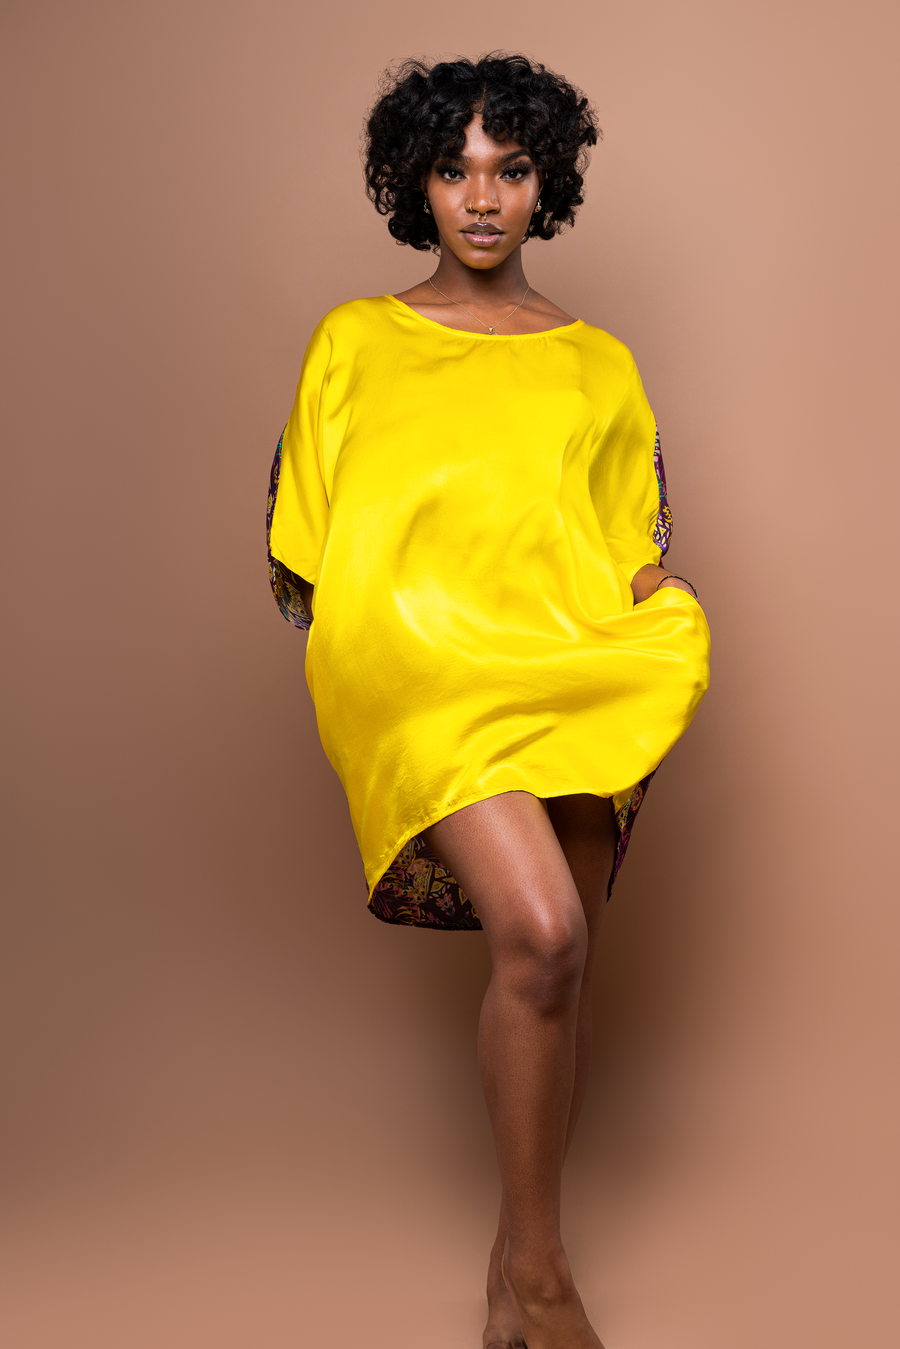 Tunde Tunic Mini Dress in Silk - Sophisticated Soul of Gold - Furkat & Robbie